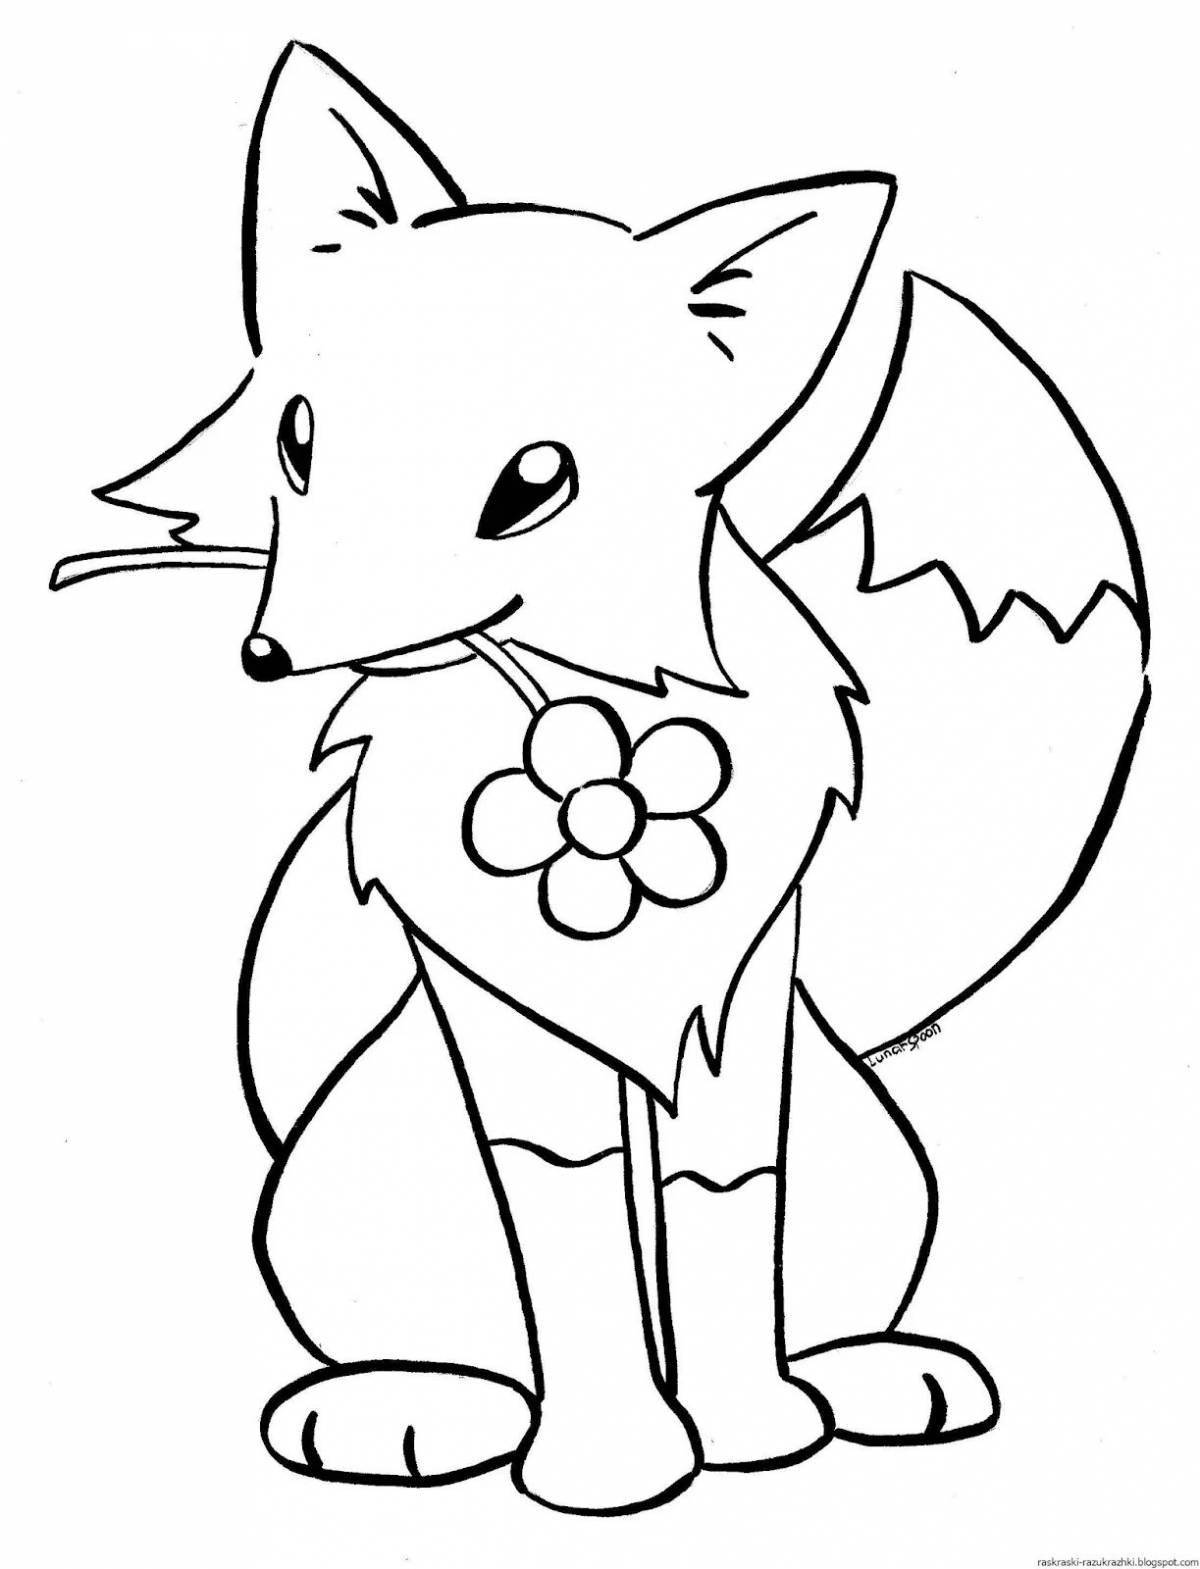 Fox coloring book for kids